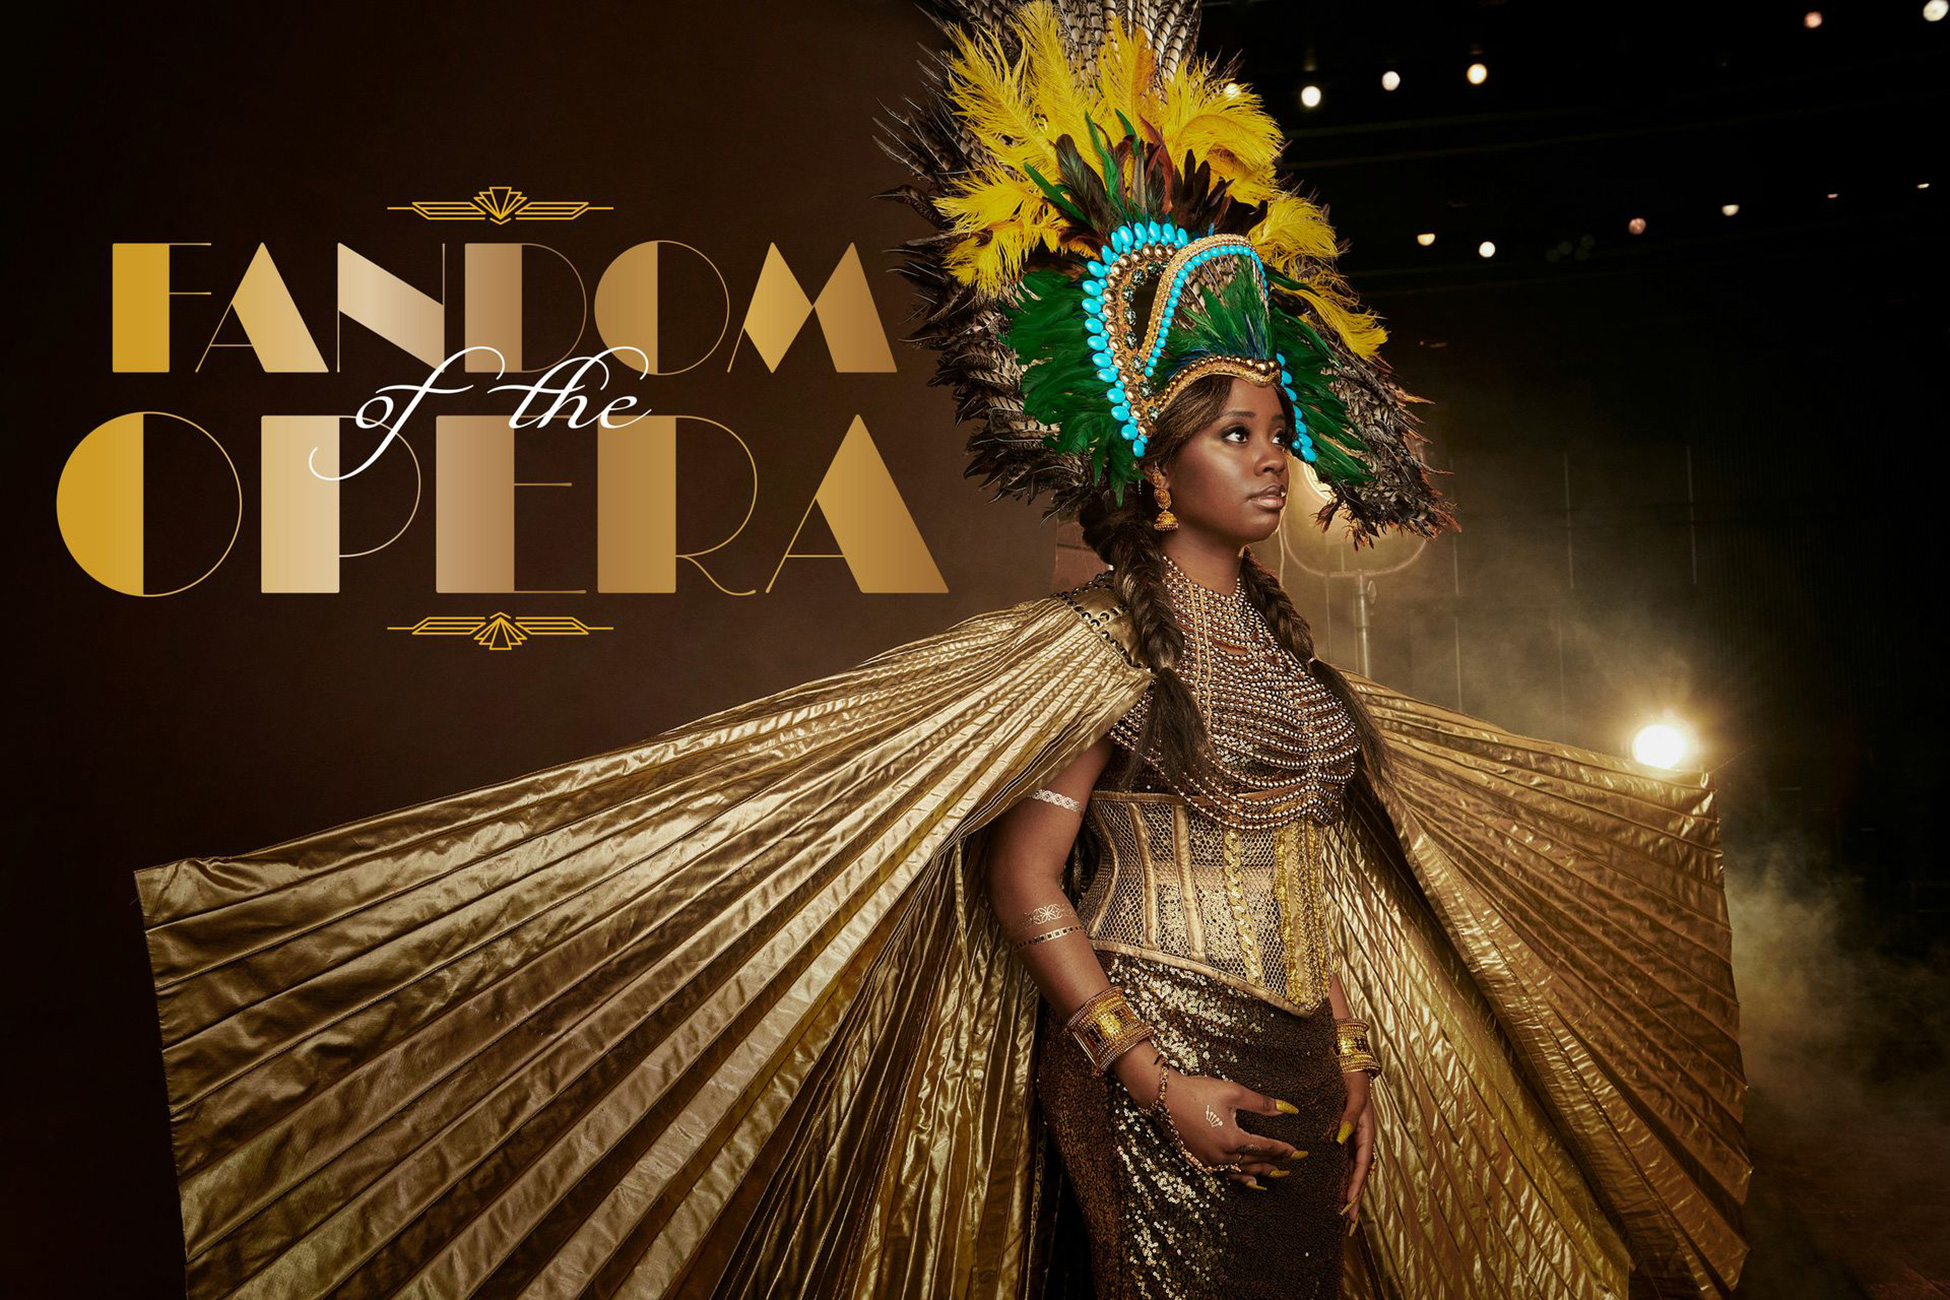 Still, edited image of a woman dressed in a gold costume with a grand feather head piece.